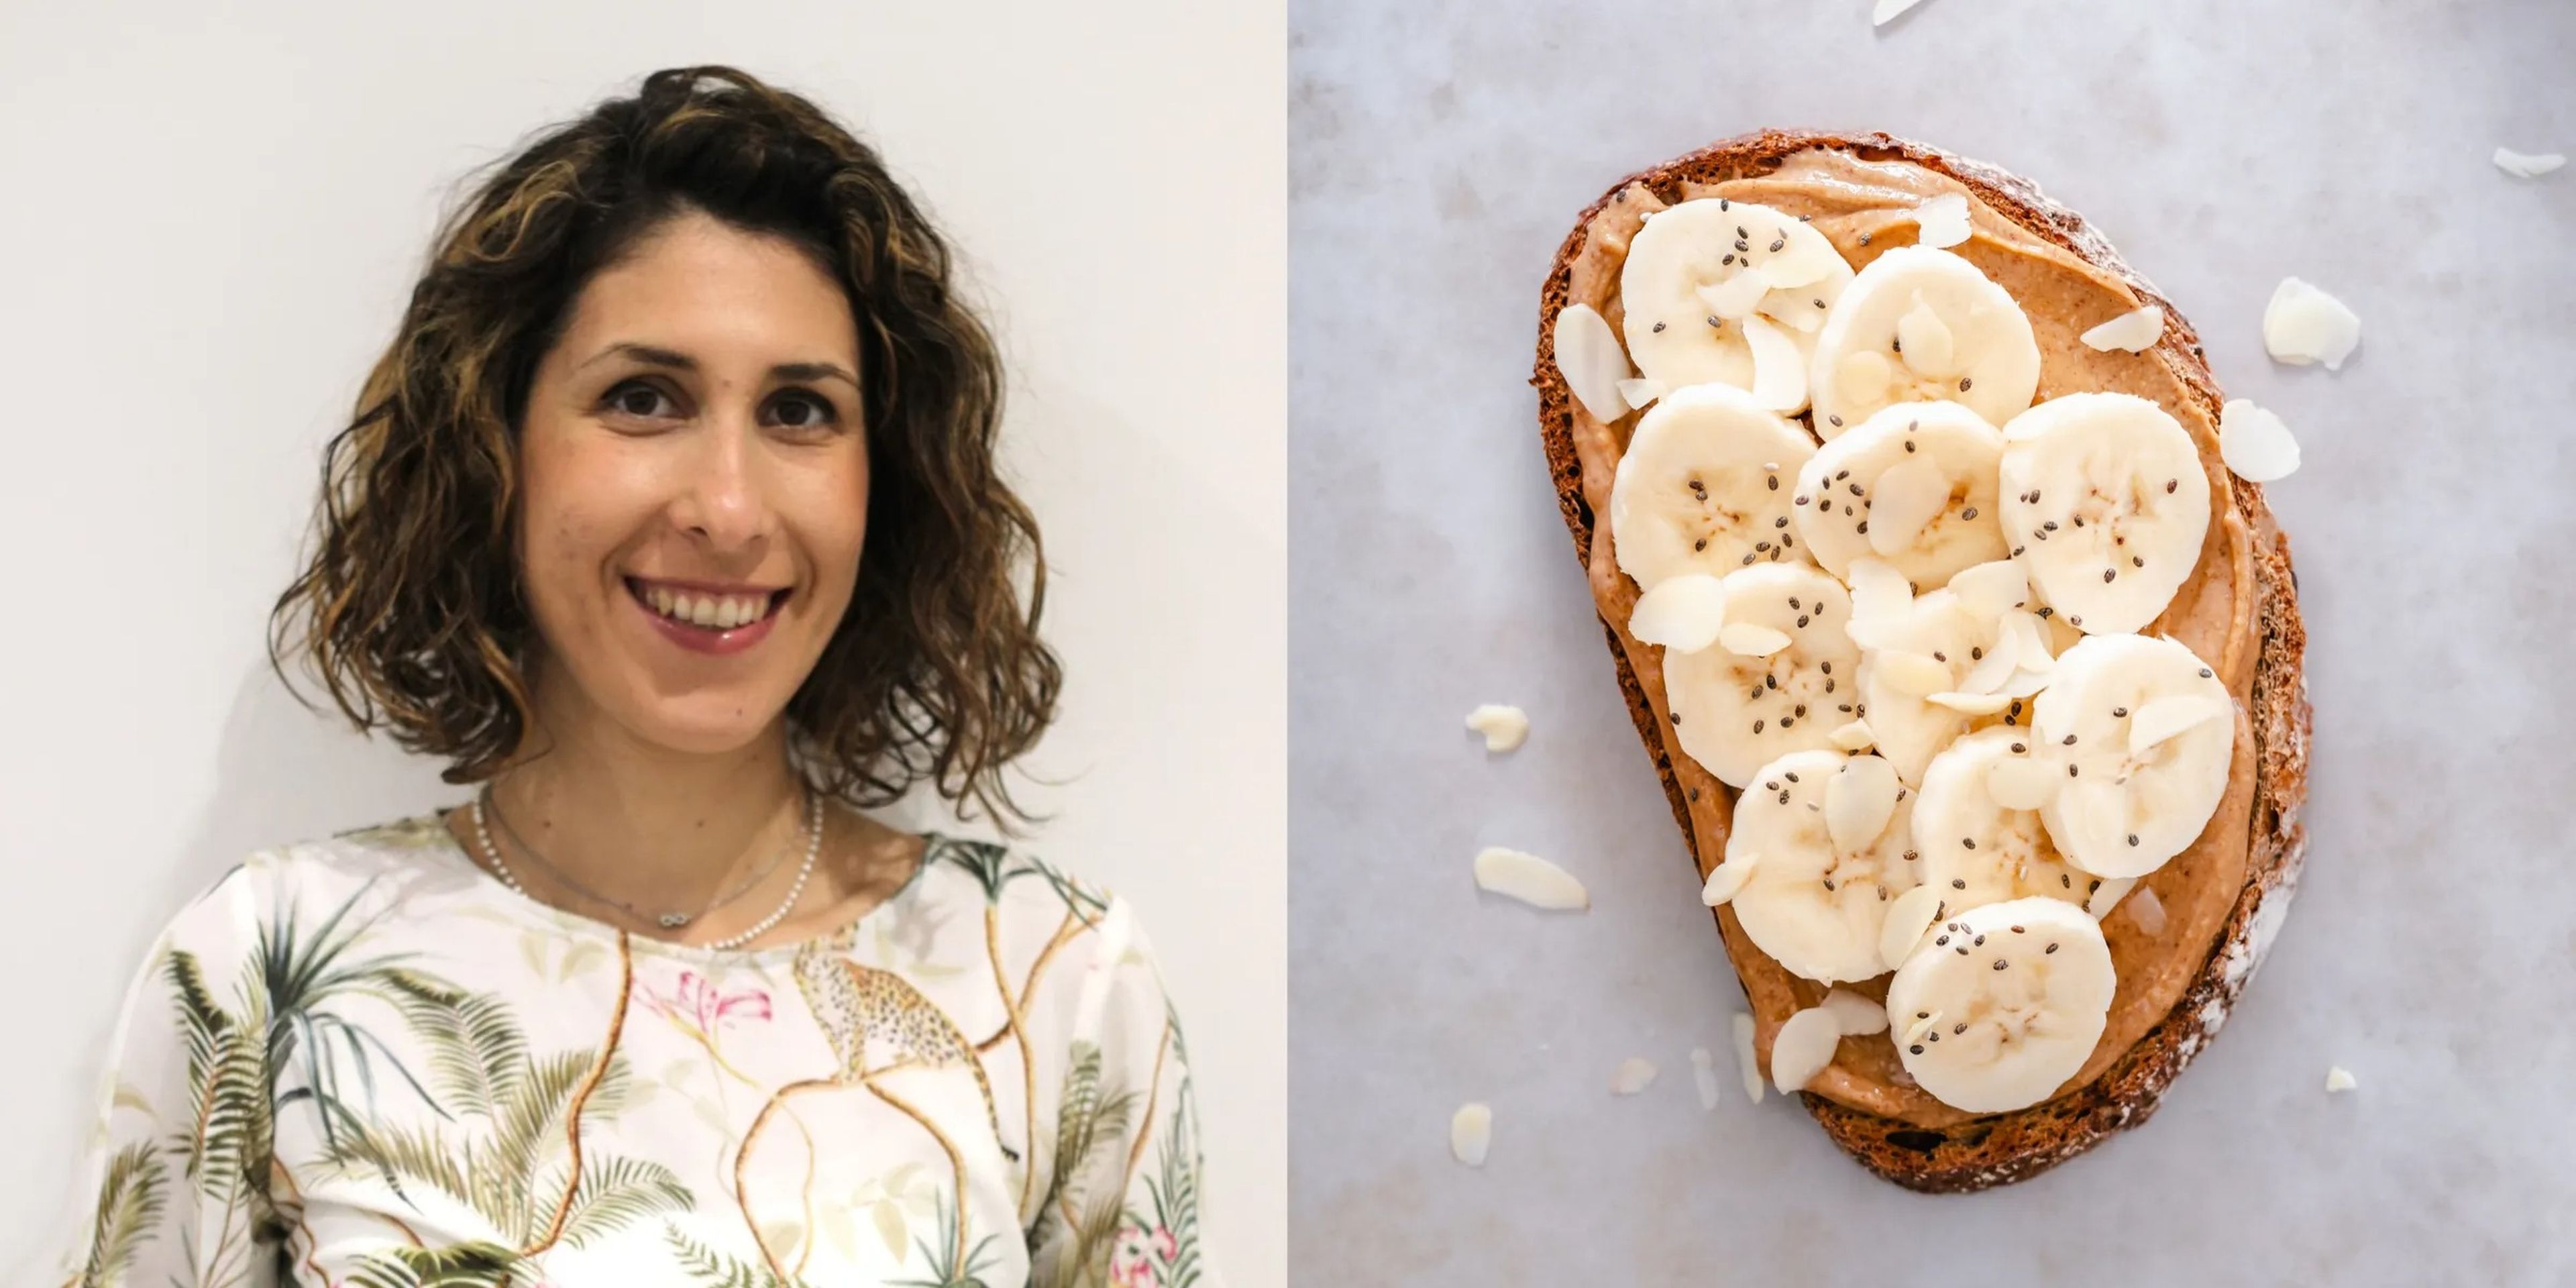 Dietitian Marika Mancino (left) Toast with peanut butter and banana (right).